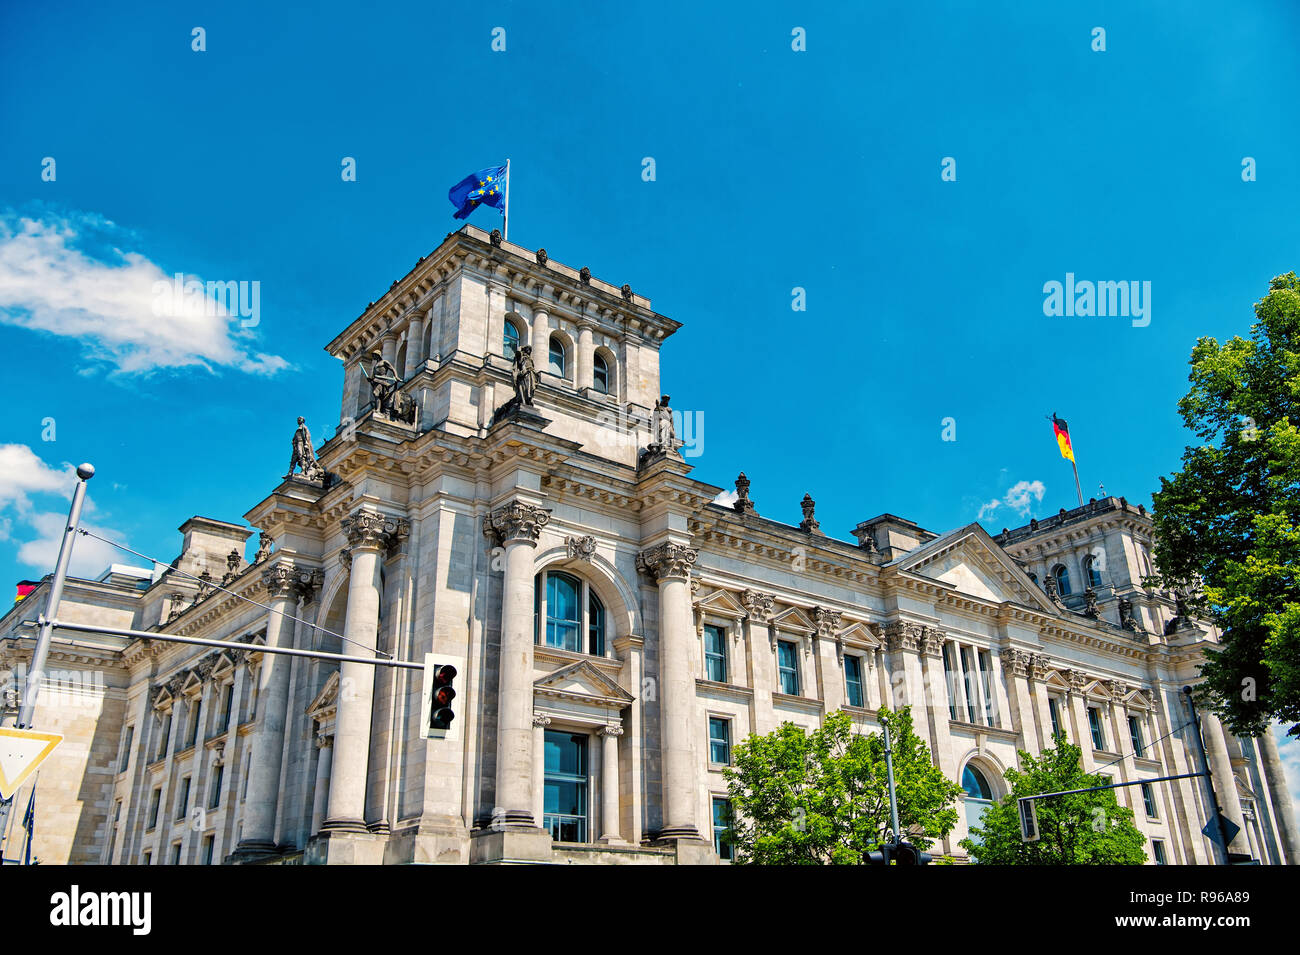 German flags waving in the wind at famous Reichstag building, seat of the German Parliament Deutscher Bundestag , on a sunny day with blue sky and clouds, central Berlin Mitte district, Germany Stock Photo